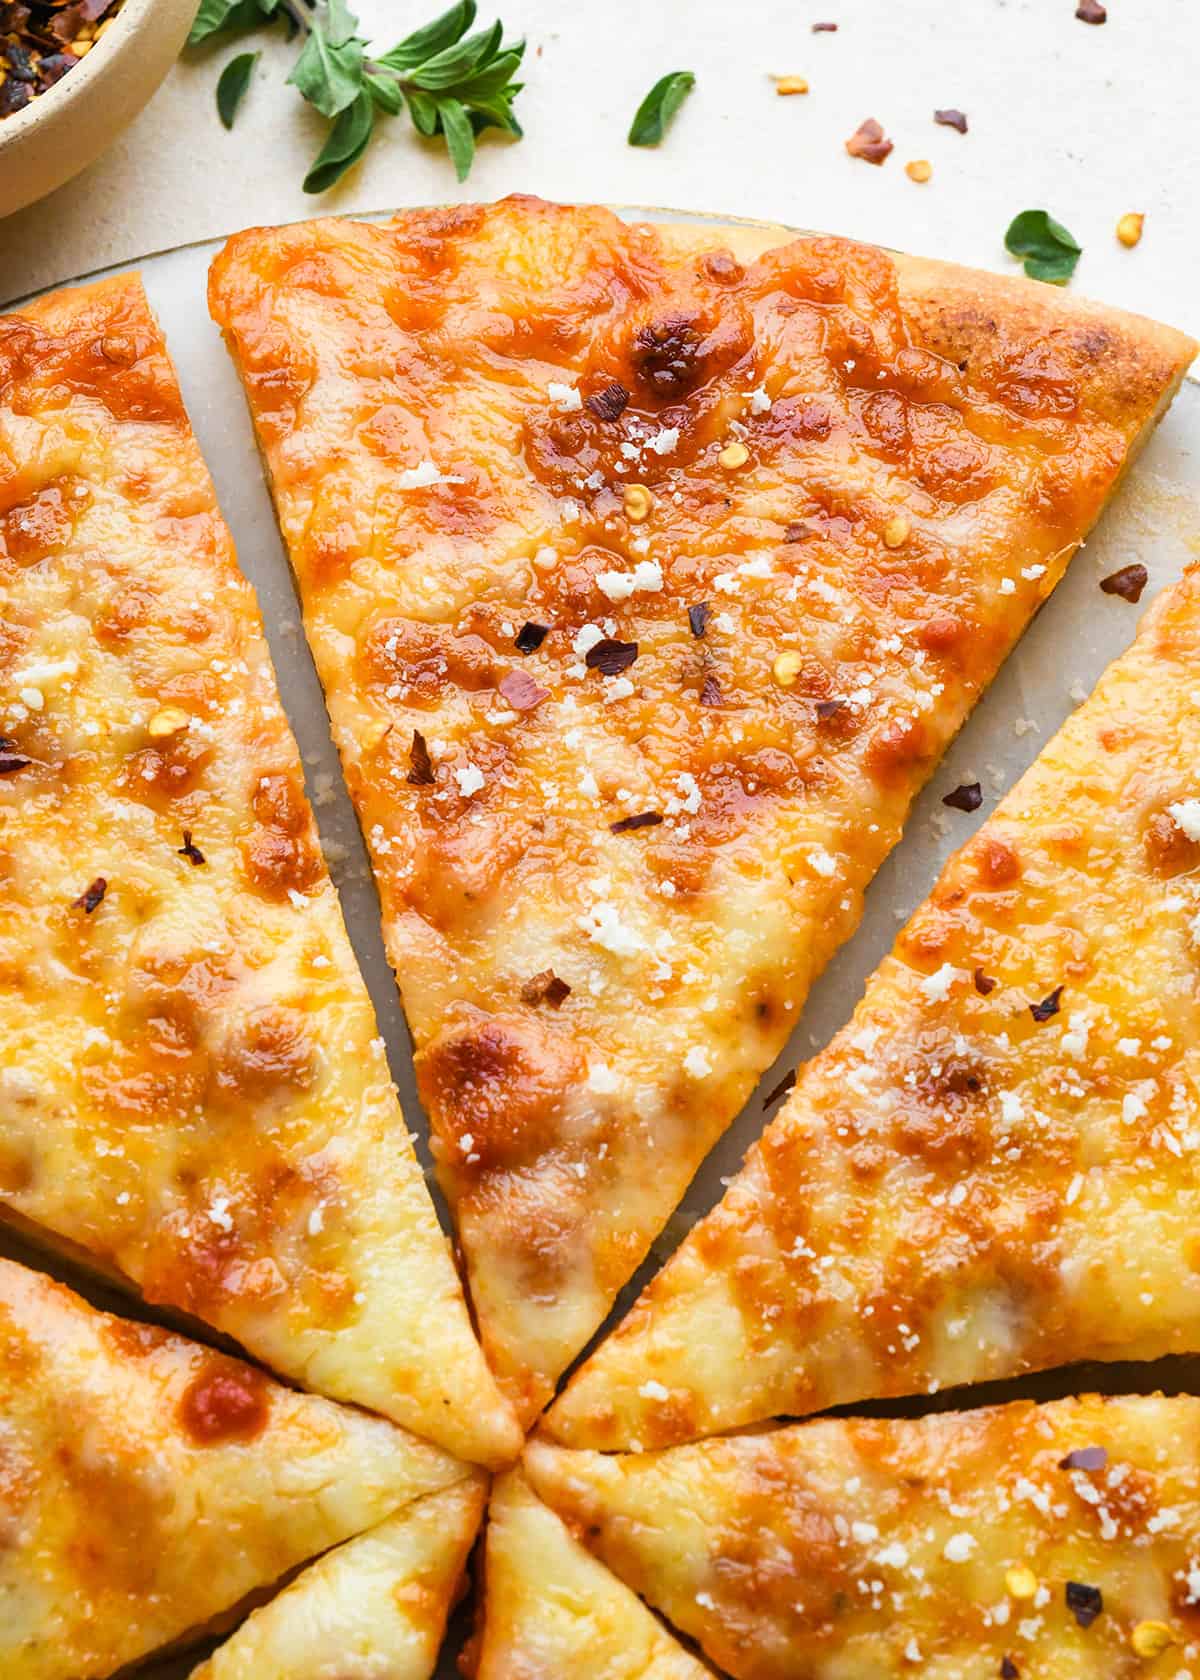 slices of Cheese Pizza sprinkled with parmesan and red pepper flakes